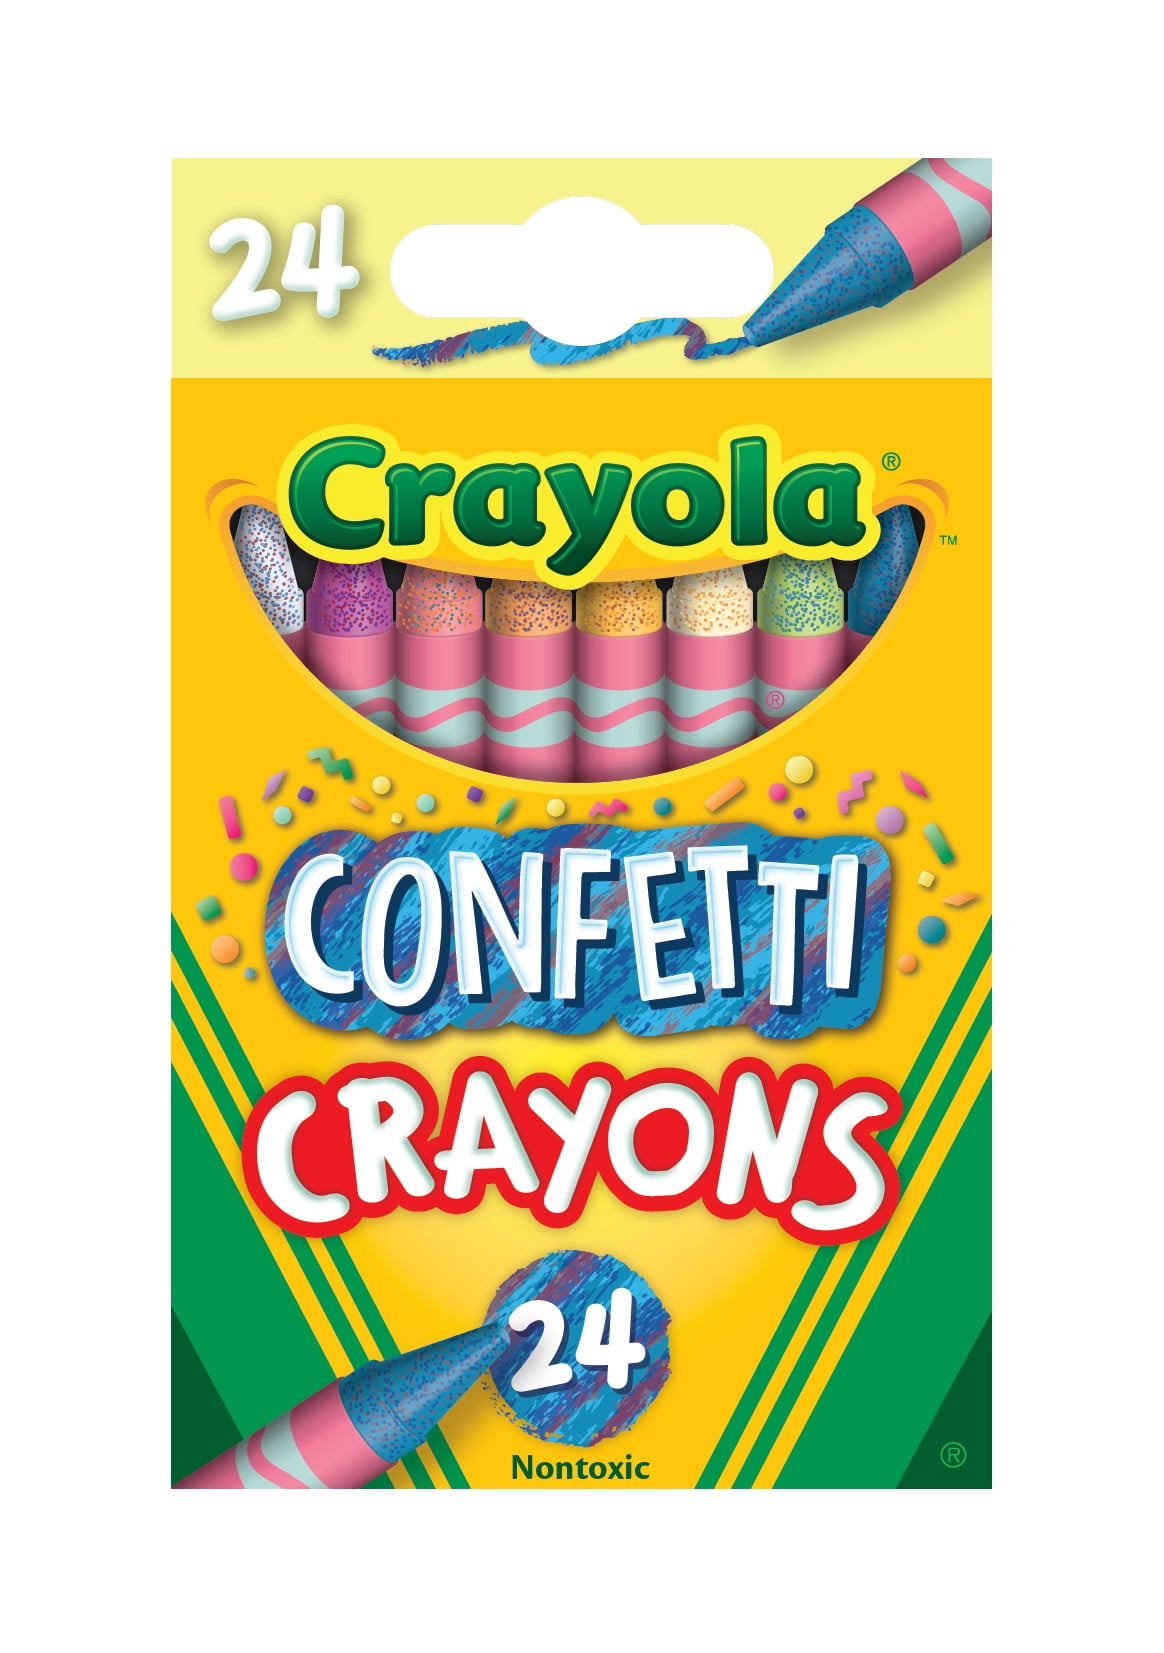 Enday Assorted 24 Count Crayons for Toddlers Non Toxic Kids Coloring  Supplies, 12-Pack